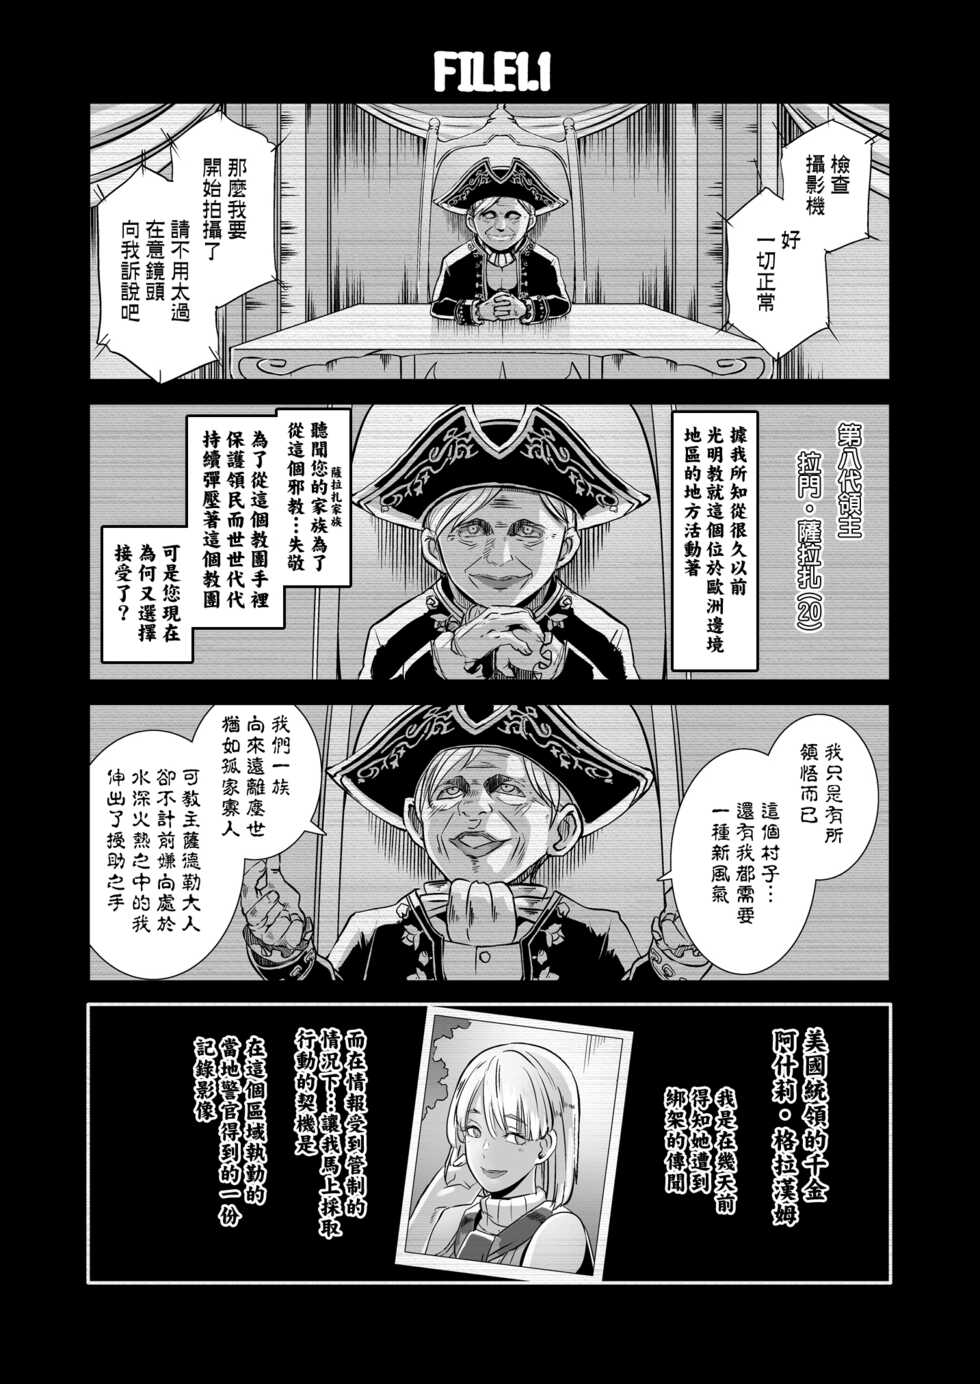 [EROQUIS! (Butcha-U)] GAMEOVERS-FILE1.1+2.0 (Resident Evil) [Chinese] [天帝哥個人漢化] [Digital] - Page 4